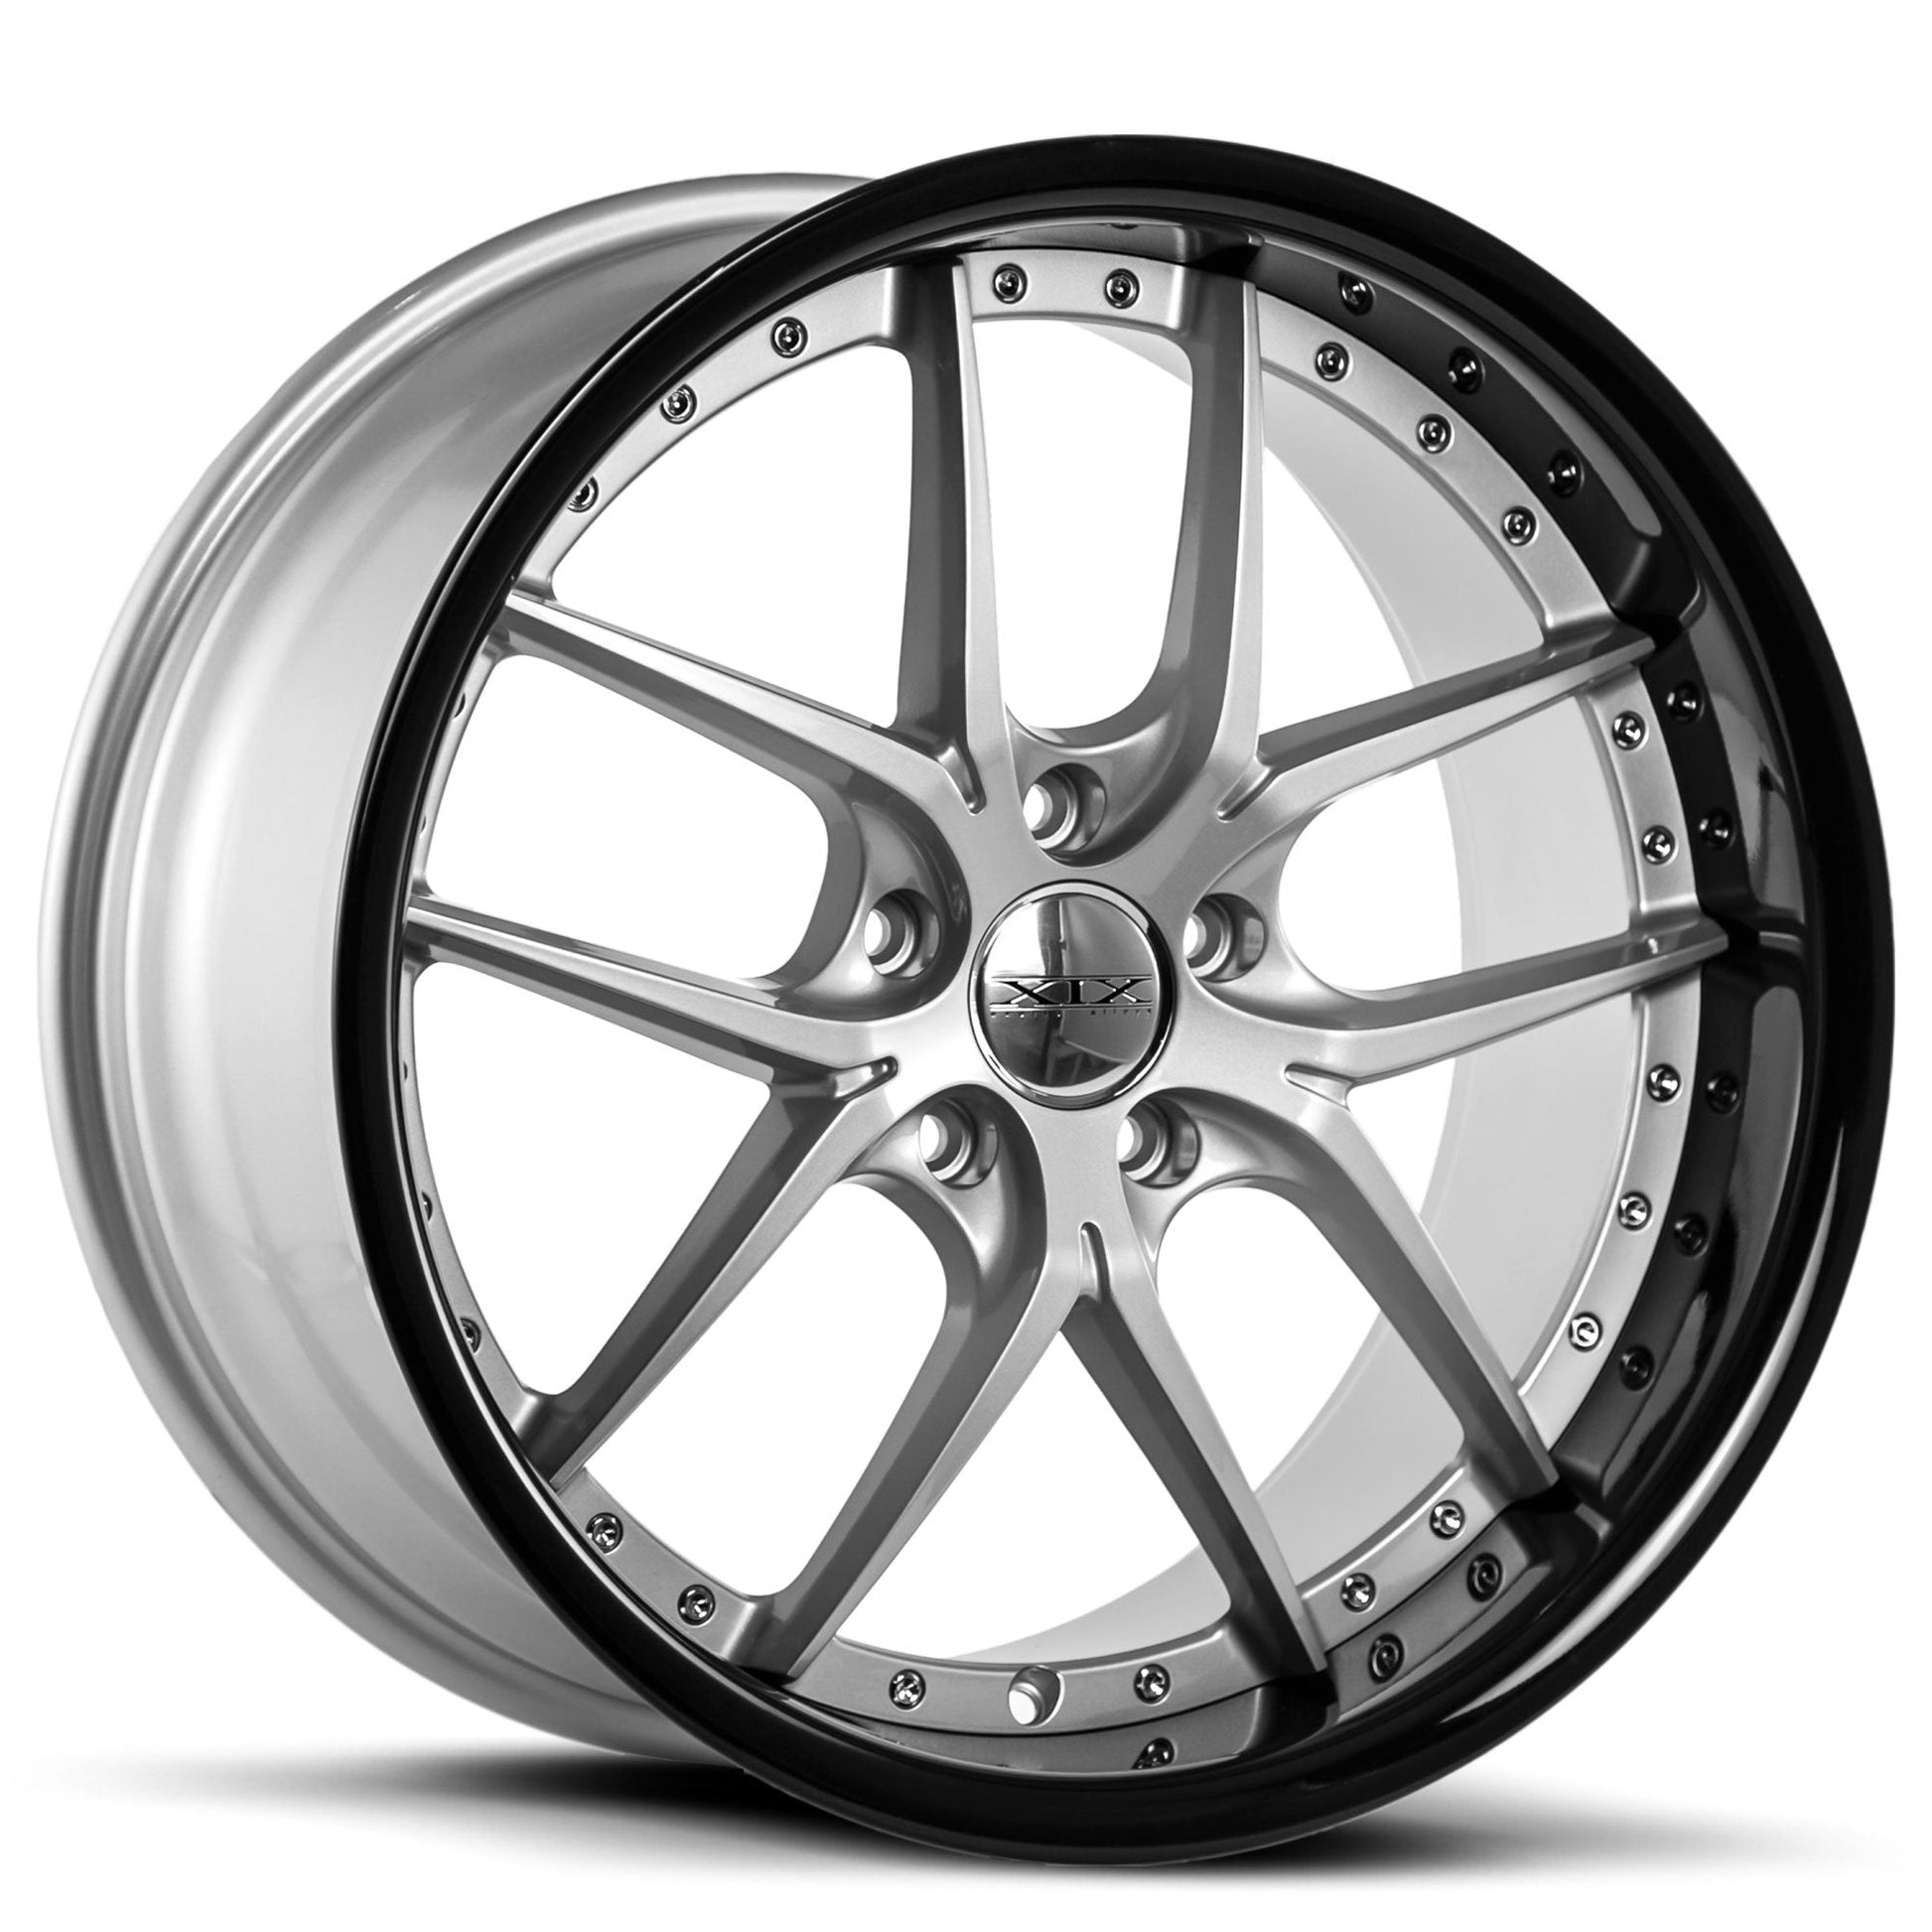 XIX-X61-Silver-Machined-with-Stainless-Steel-Lip-Silver-20x10-73.1-wheels-rims-felger-Felghuset